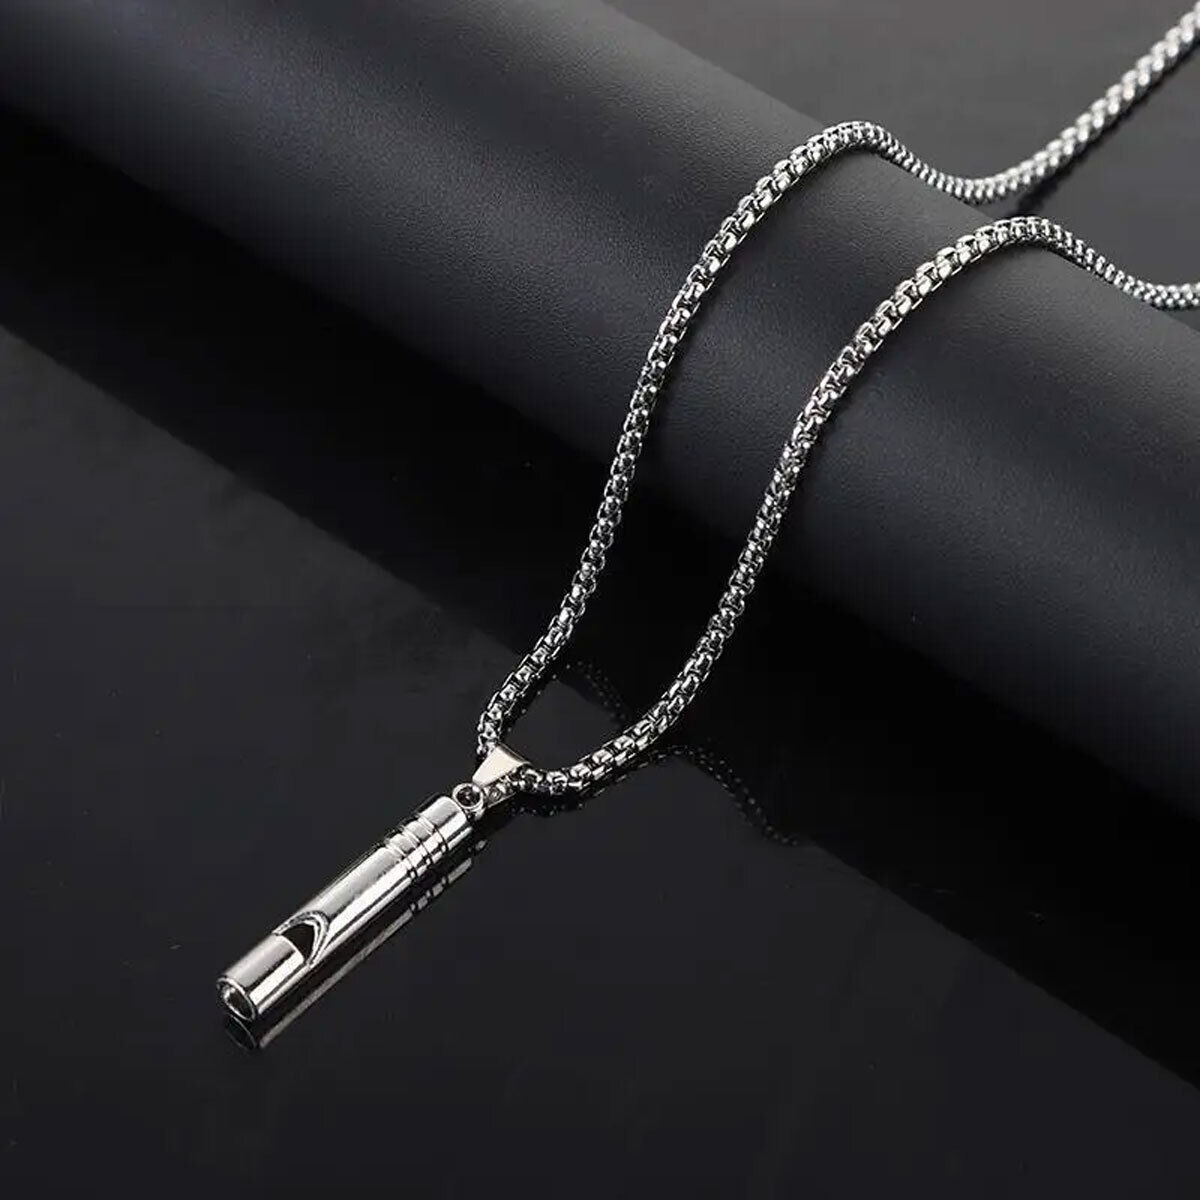 Stress Relief Necklaces Anti Vaping Quit Smoking Mindfulness Breathing ...